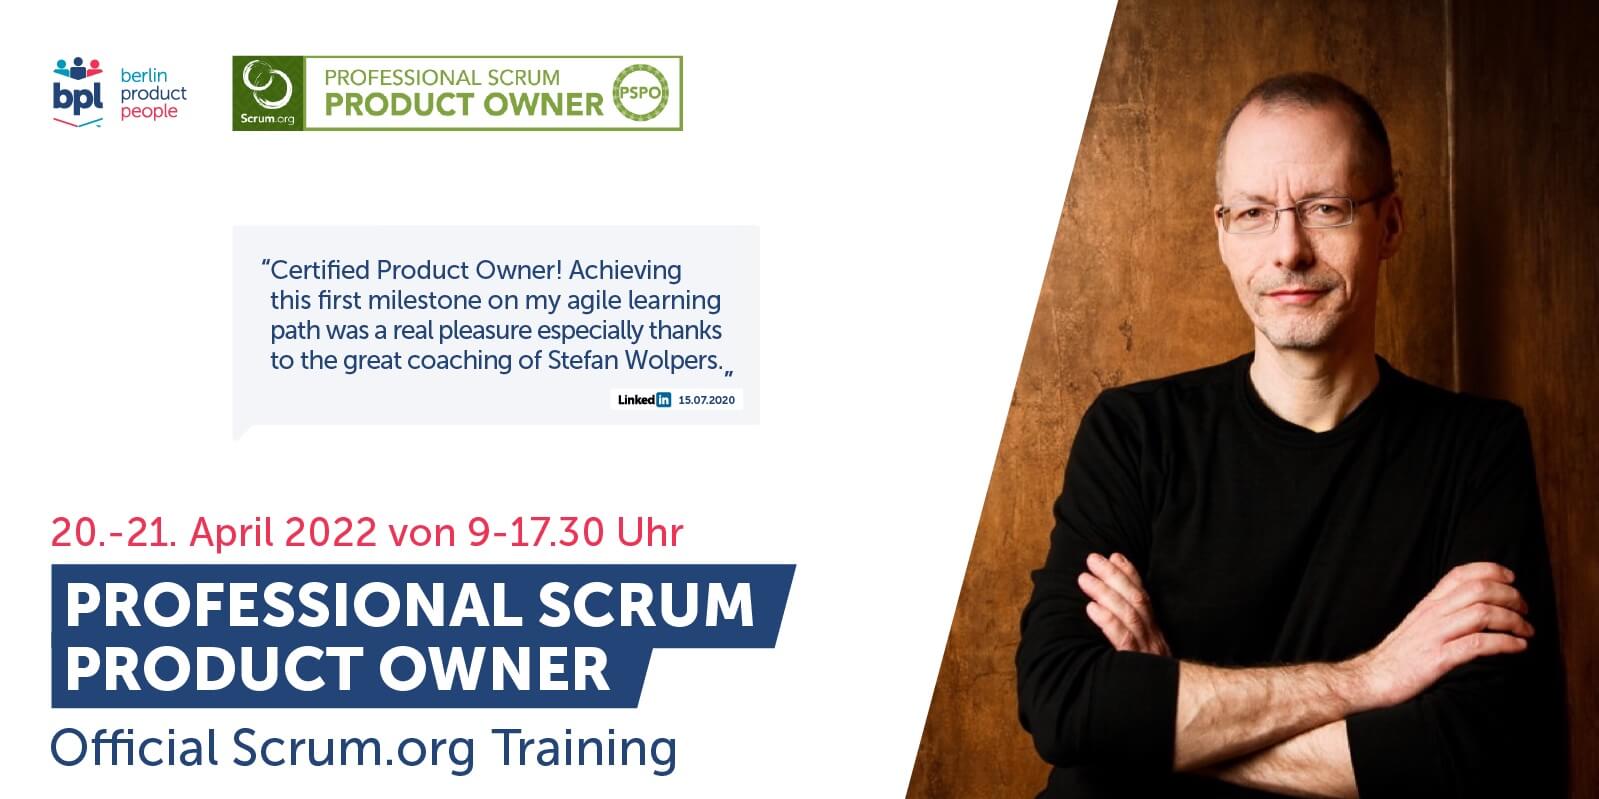 Professional Scrum Product Owner Onlineschulung mit PSPO I Zertifizierung — 20. und 21. April 2022 — Berlin Product People GmbH